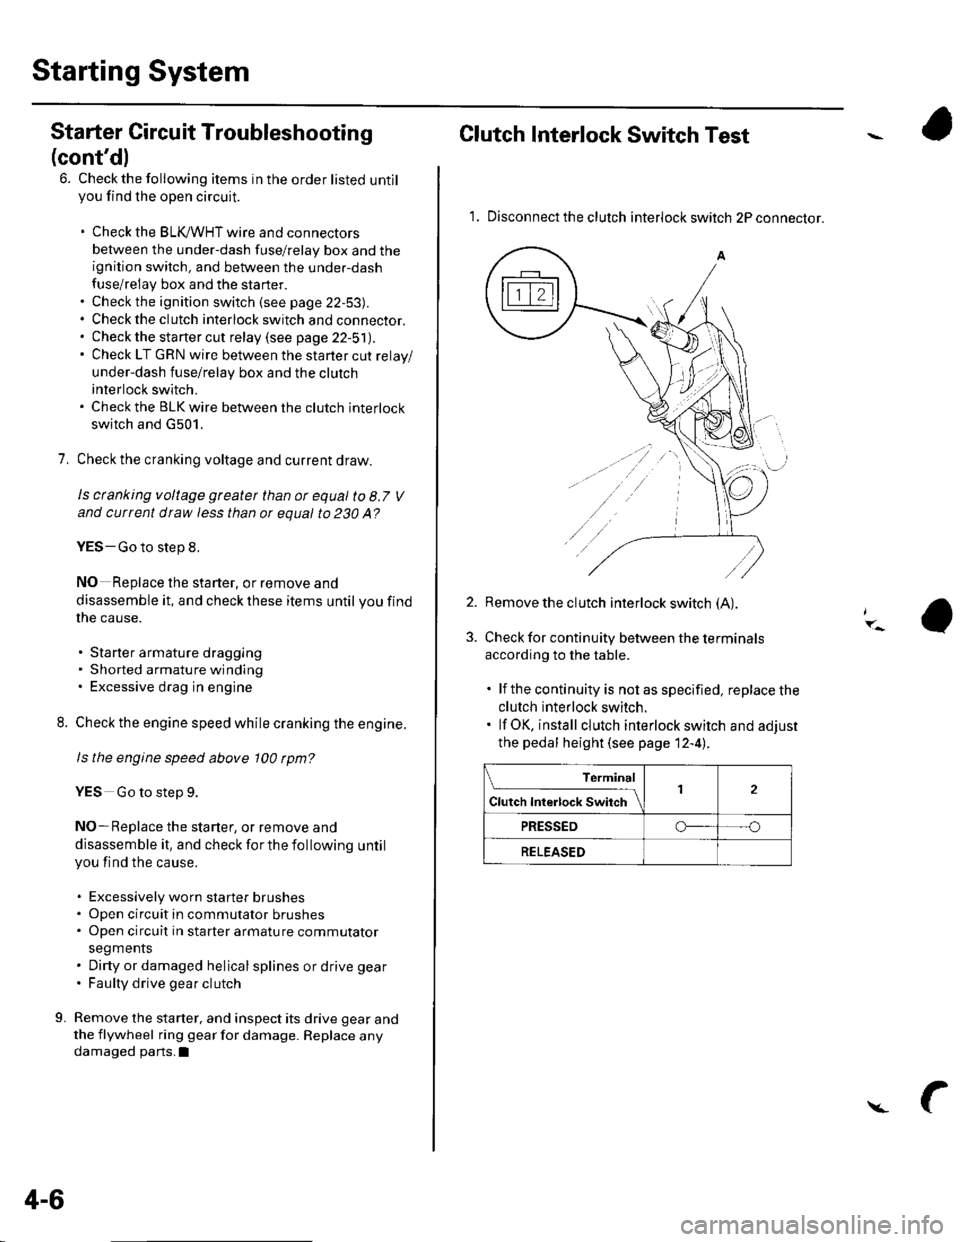 HONDA CIVIC 2003 7.G Service Manual Starting System
Starter Circuit Troubleshooting
(contdl
6. Check the following items in the order listed untilyou find the open circuit.
. Check the BLIVWHT wire and connectors
between the under-dash